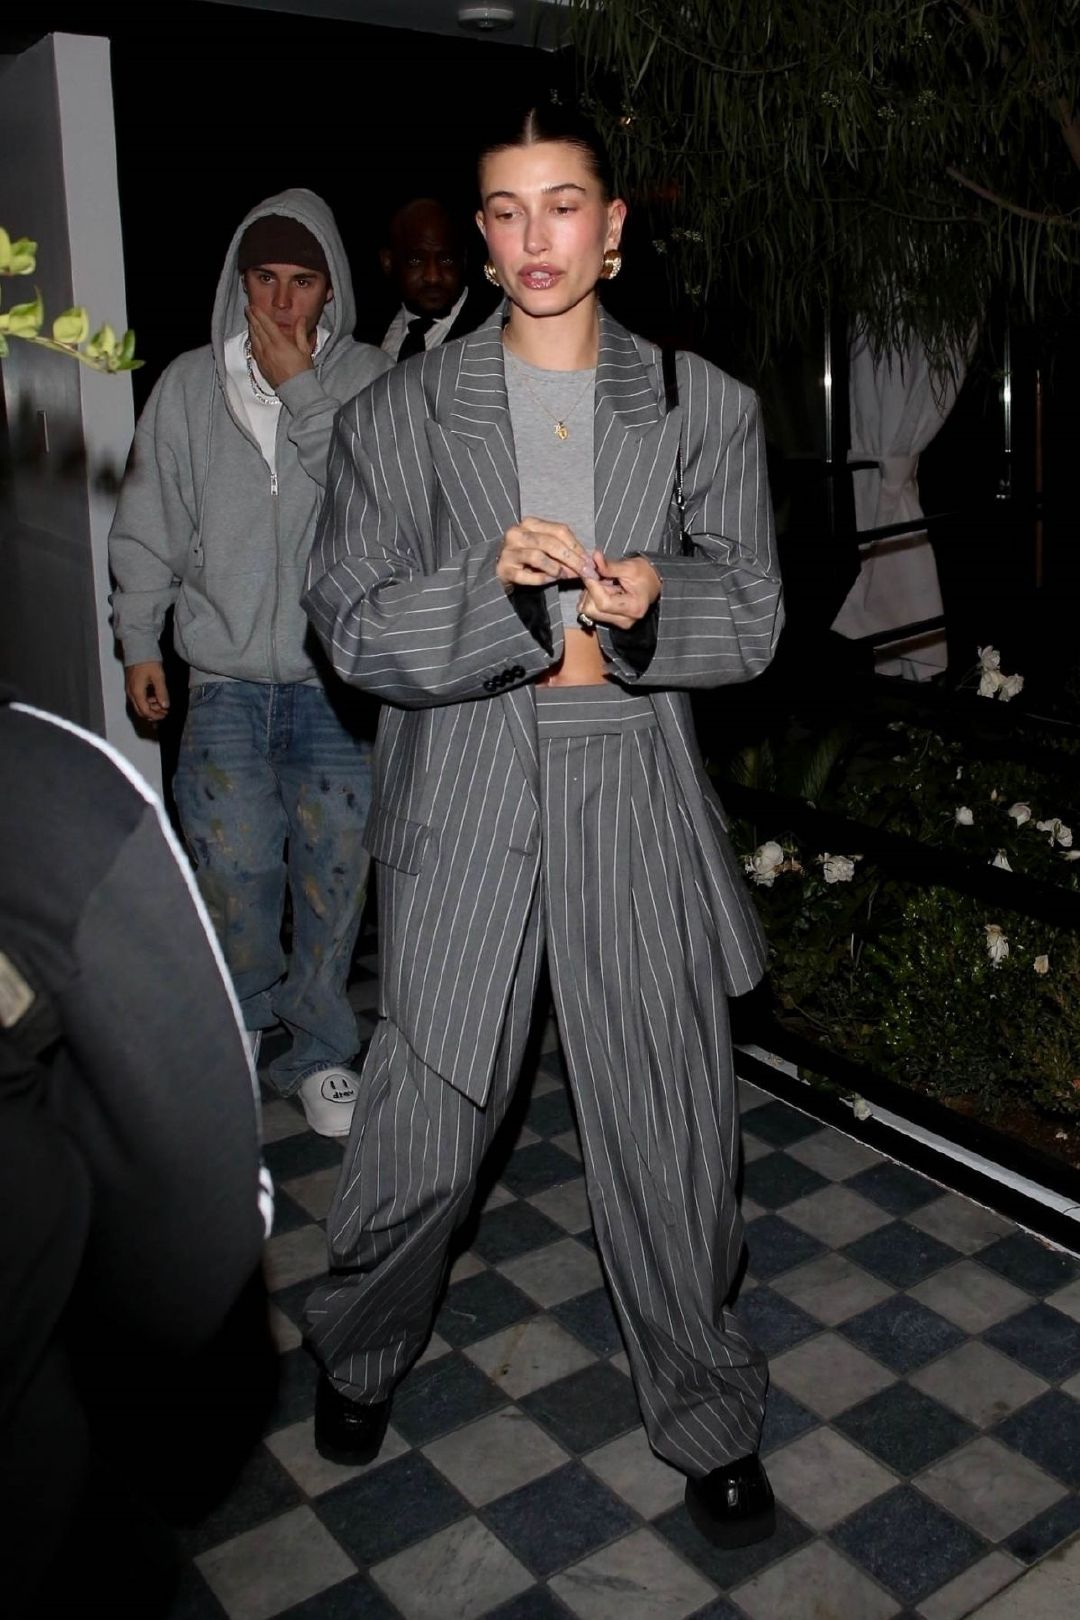 Hailey and Justin Bieber Arrives at the Birds Club in Los Angeles